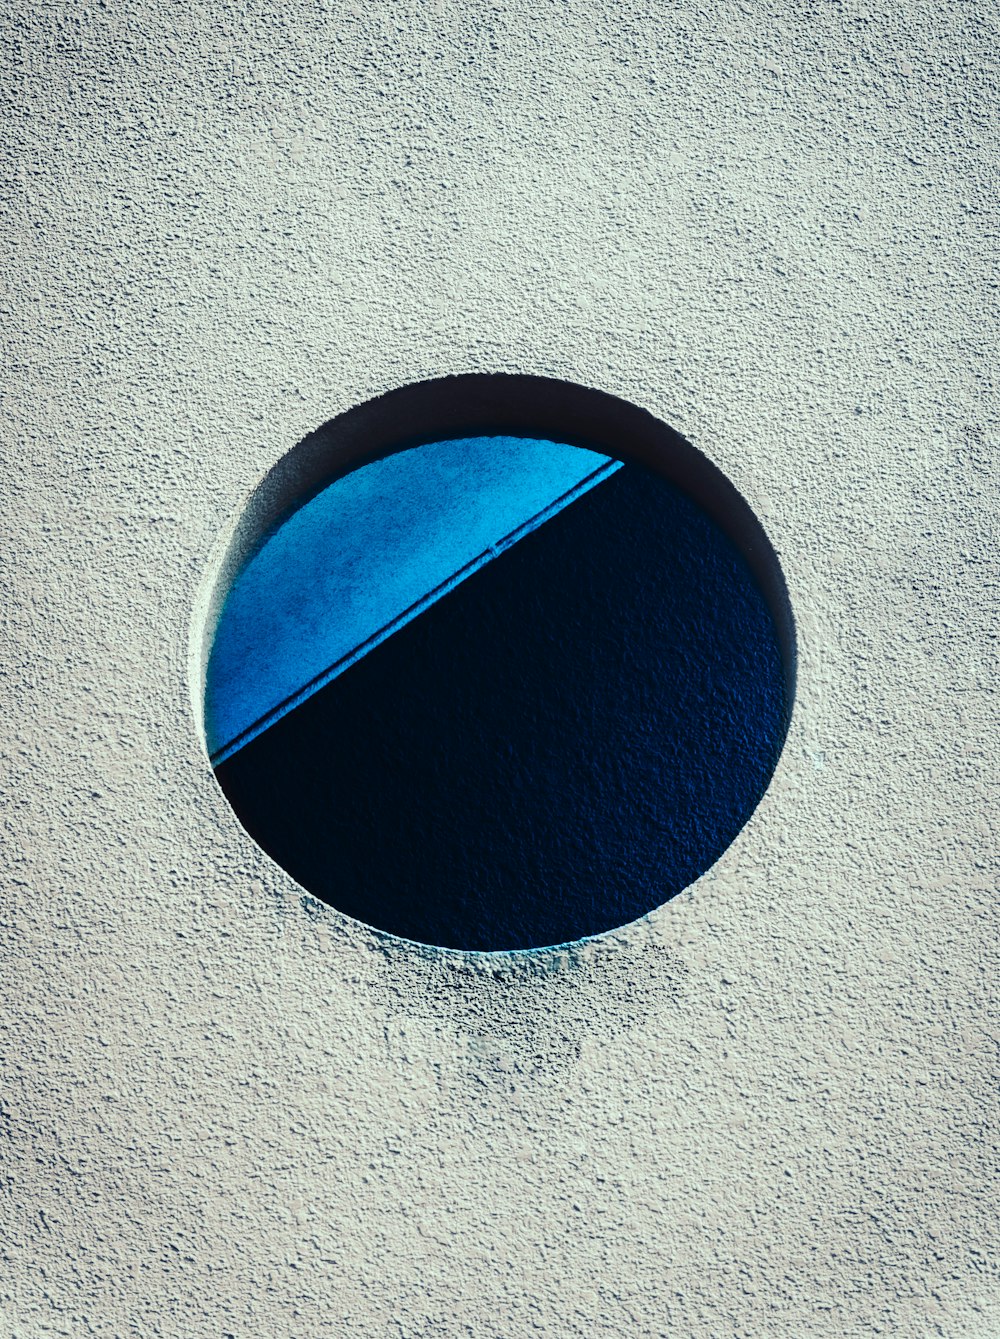 a round hole in the cement with a blue surface